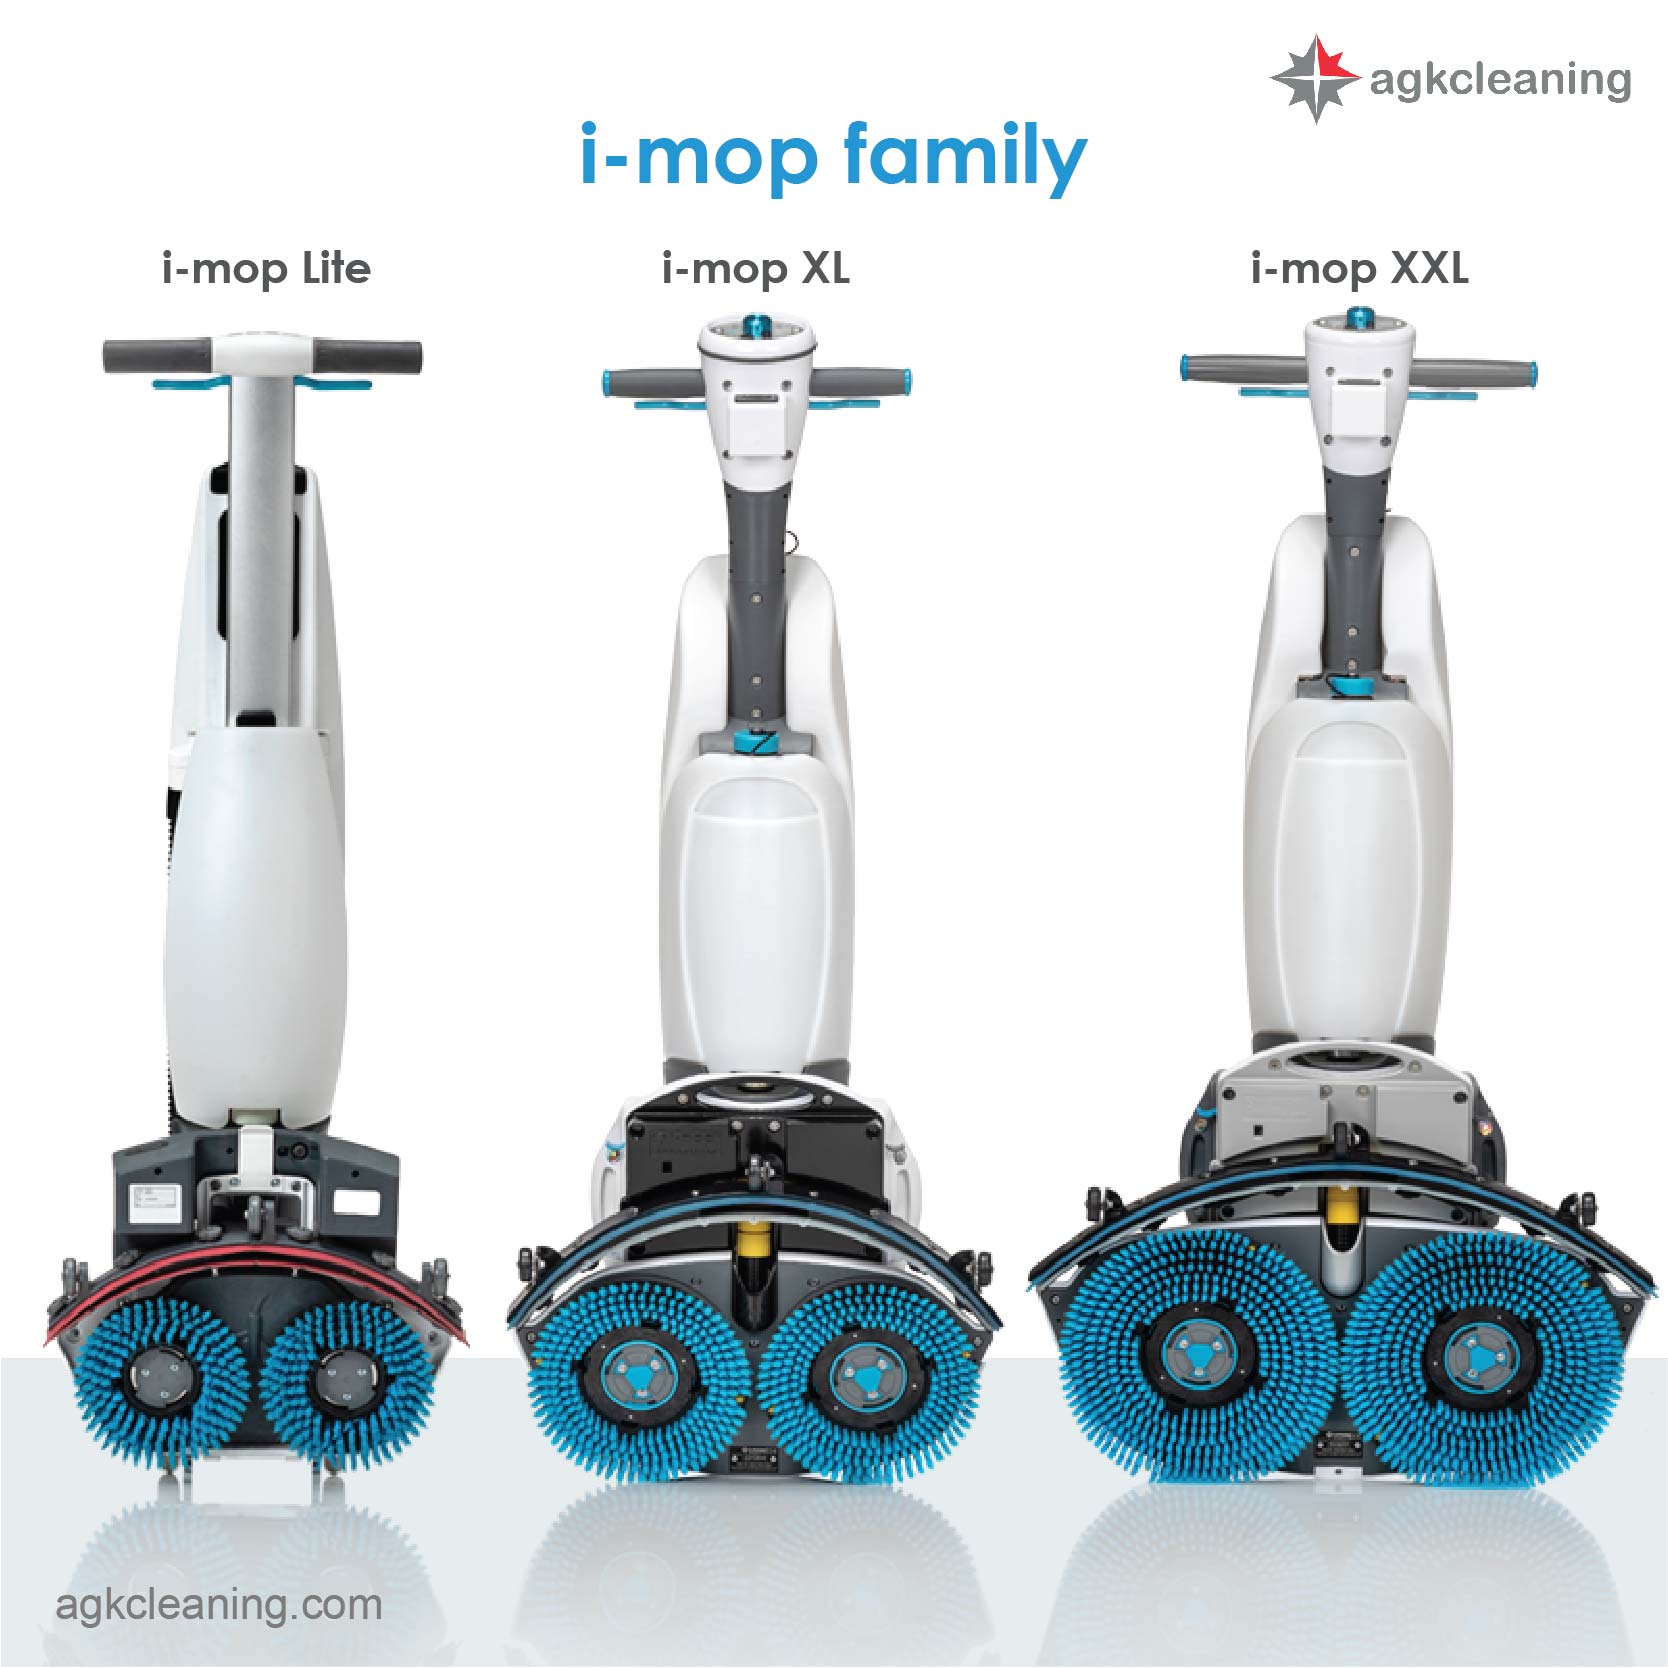 <span style='color:#000;font-size:18px;font-weight:700;'>I-MOP XL</span><br><span style='color:#000;font-size:14px !important;font-weight:400!important;'>Scrubber Dryer (Battery)</span>